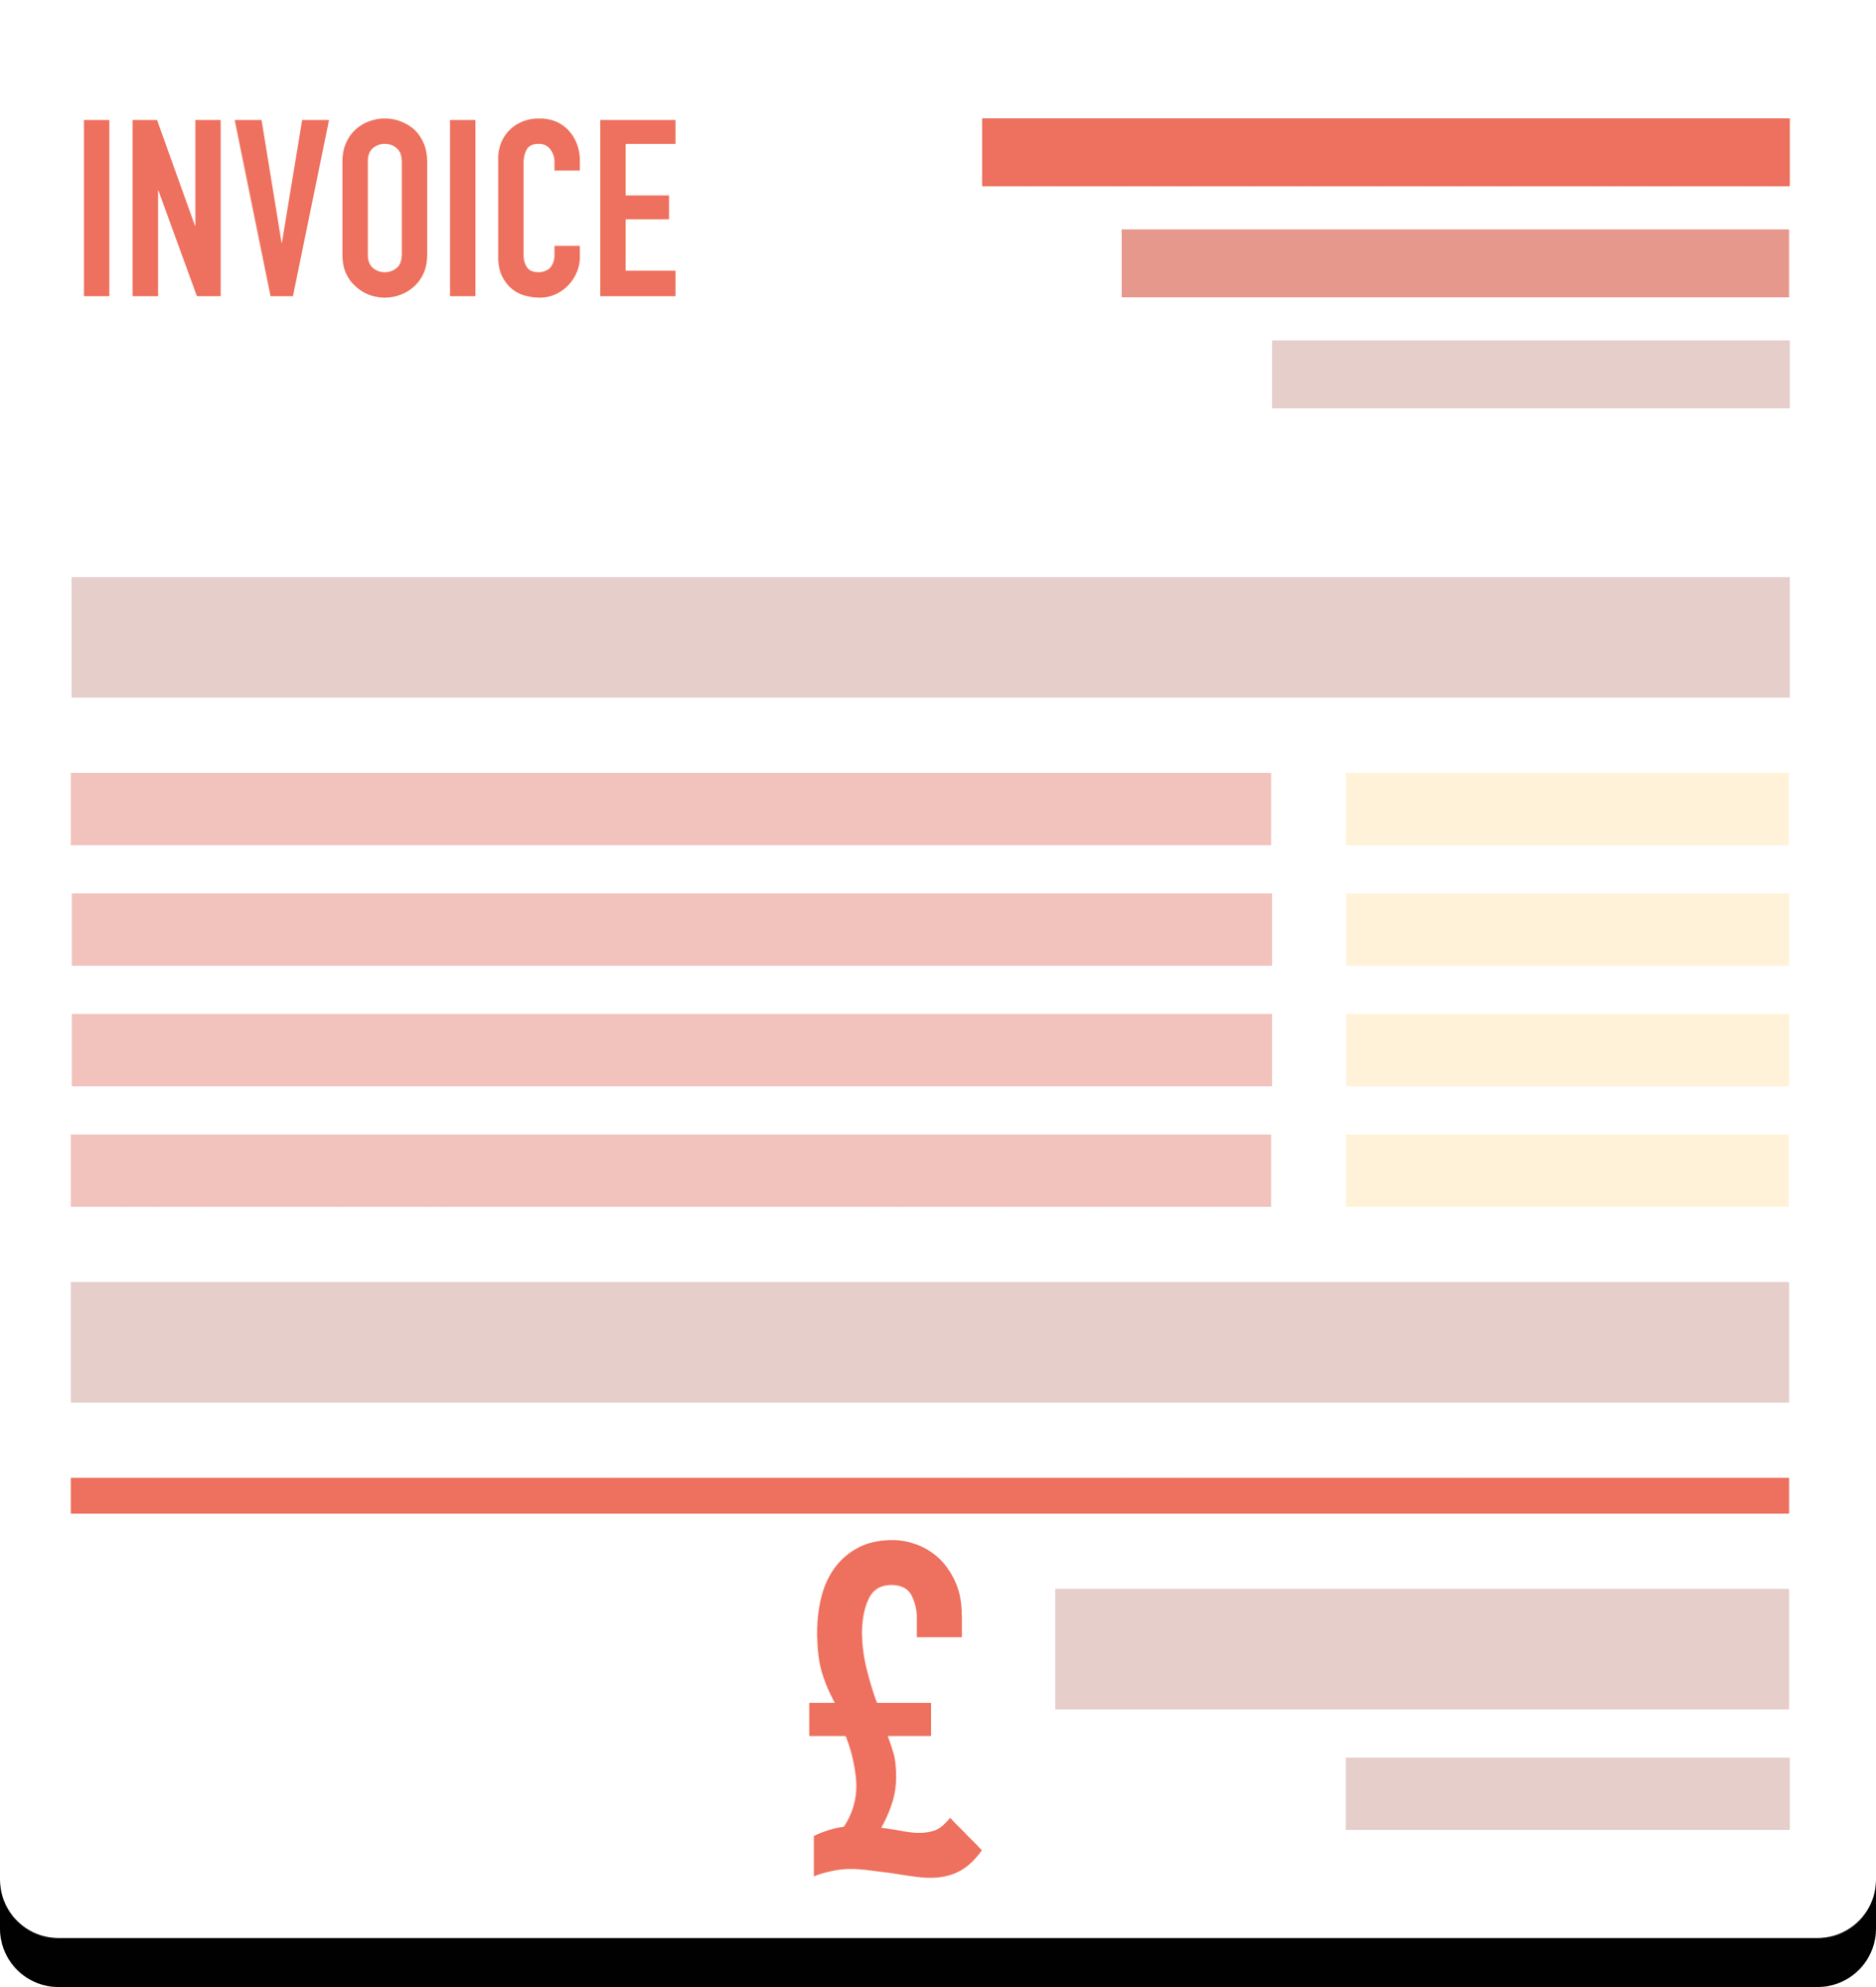 Invoicing Template for Carpet Cleaning